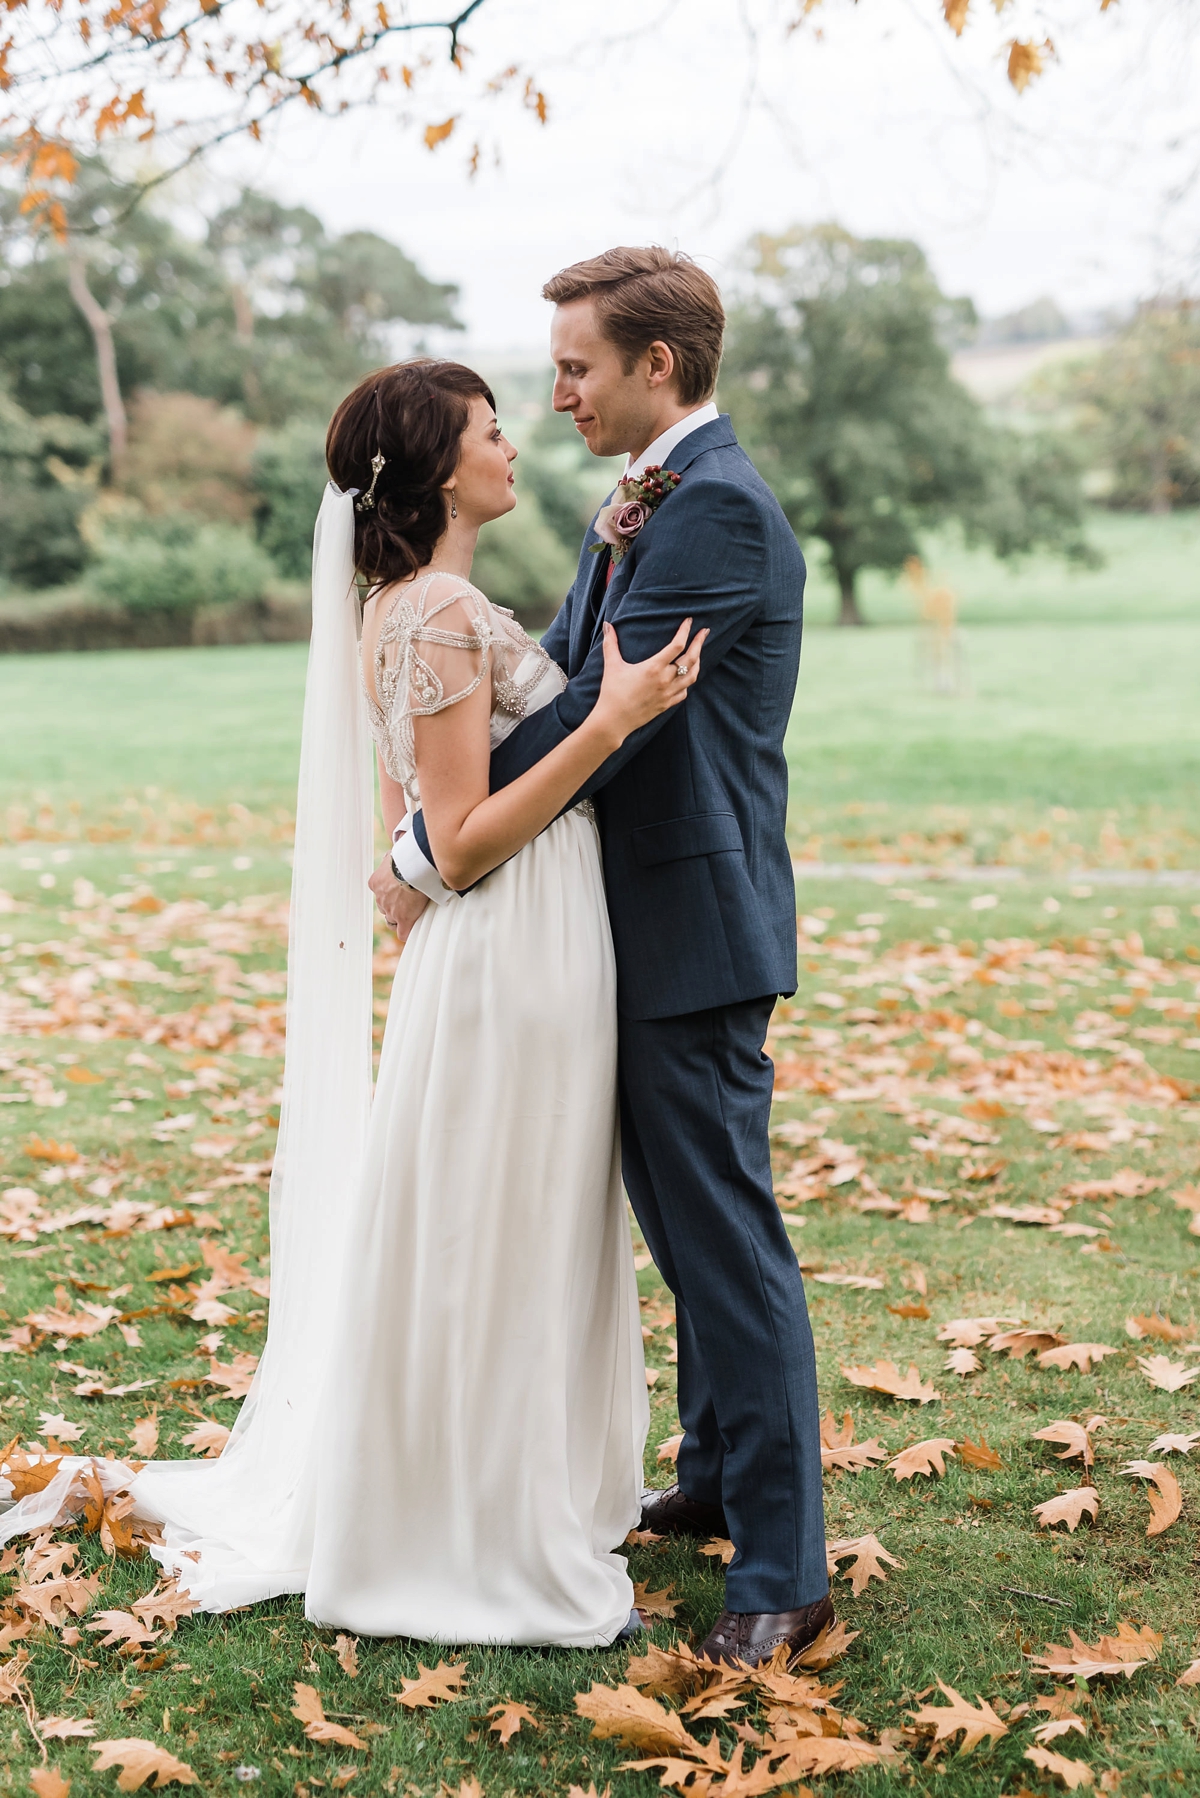 46 An Anna Campbell gown for a countryhouse wedding filled with a speakeasy vibe. Images by Su Ann Simon